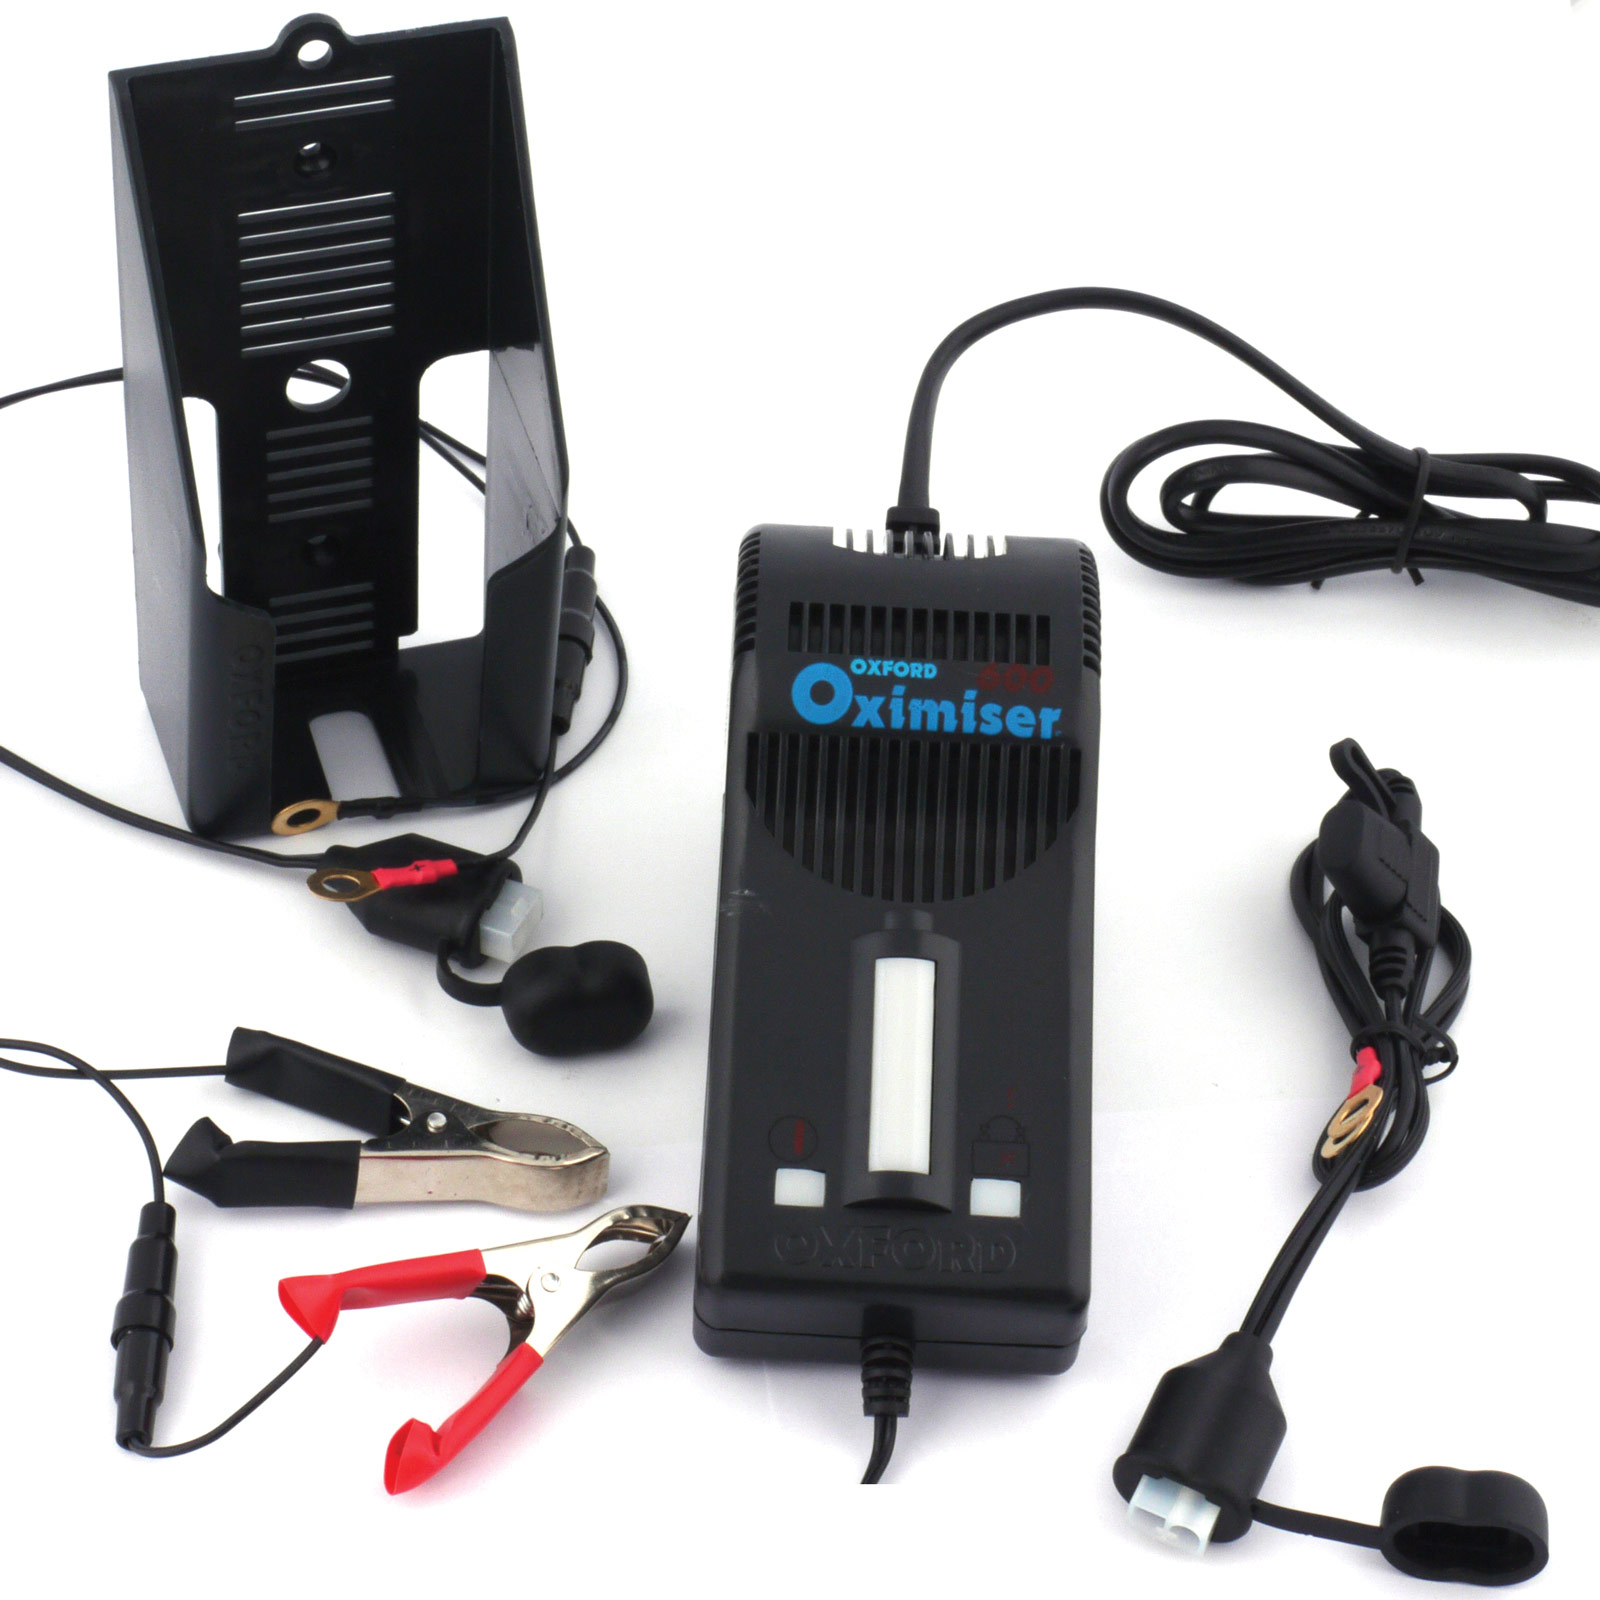 Oximiser Battery Charger Free Uk Delivery Flexible Ways To Pay M P